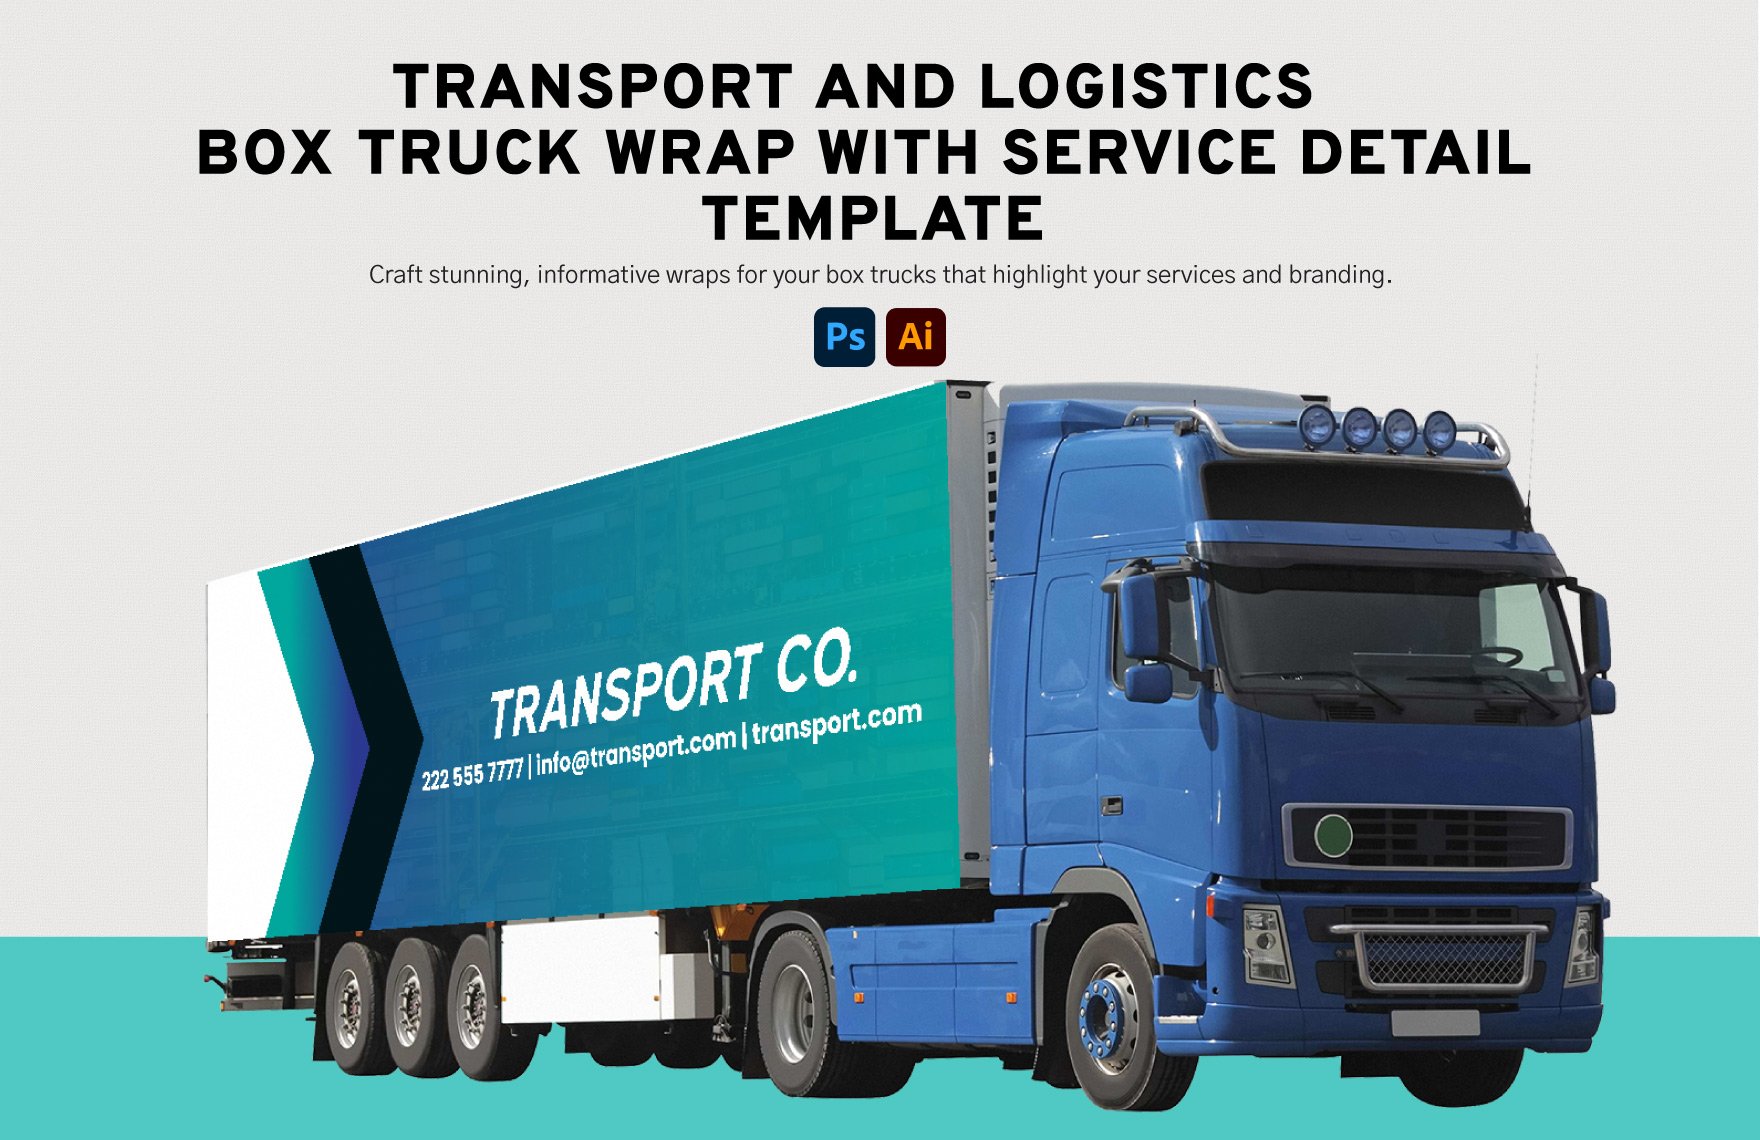 Transport and Logistics Box Truck Wrap with Service Details Template in Illustrator, PSD